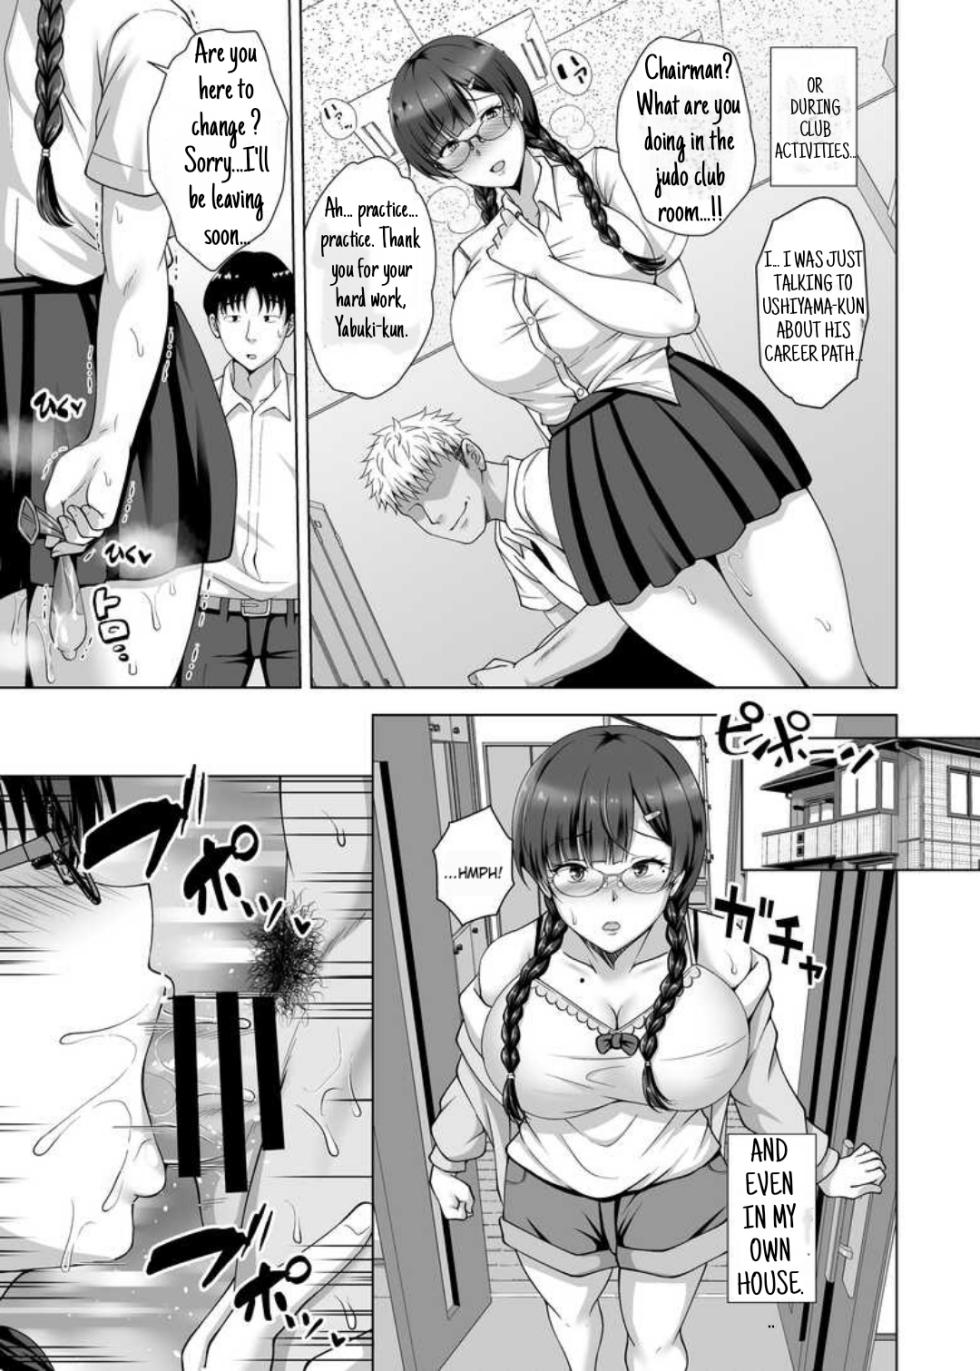 [Taishou Romanesque (Toono Suika)] Why she took off her glasses ~The Unrequited Love of the Class President with Huge Tits who allowed herself to be Manipulated by her Boyfriend~ [NekoCreme] [Digital] - Page 21